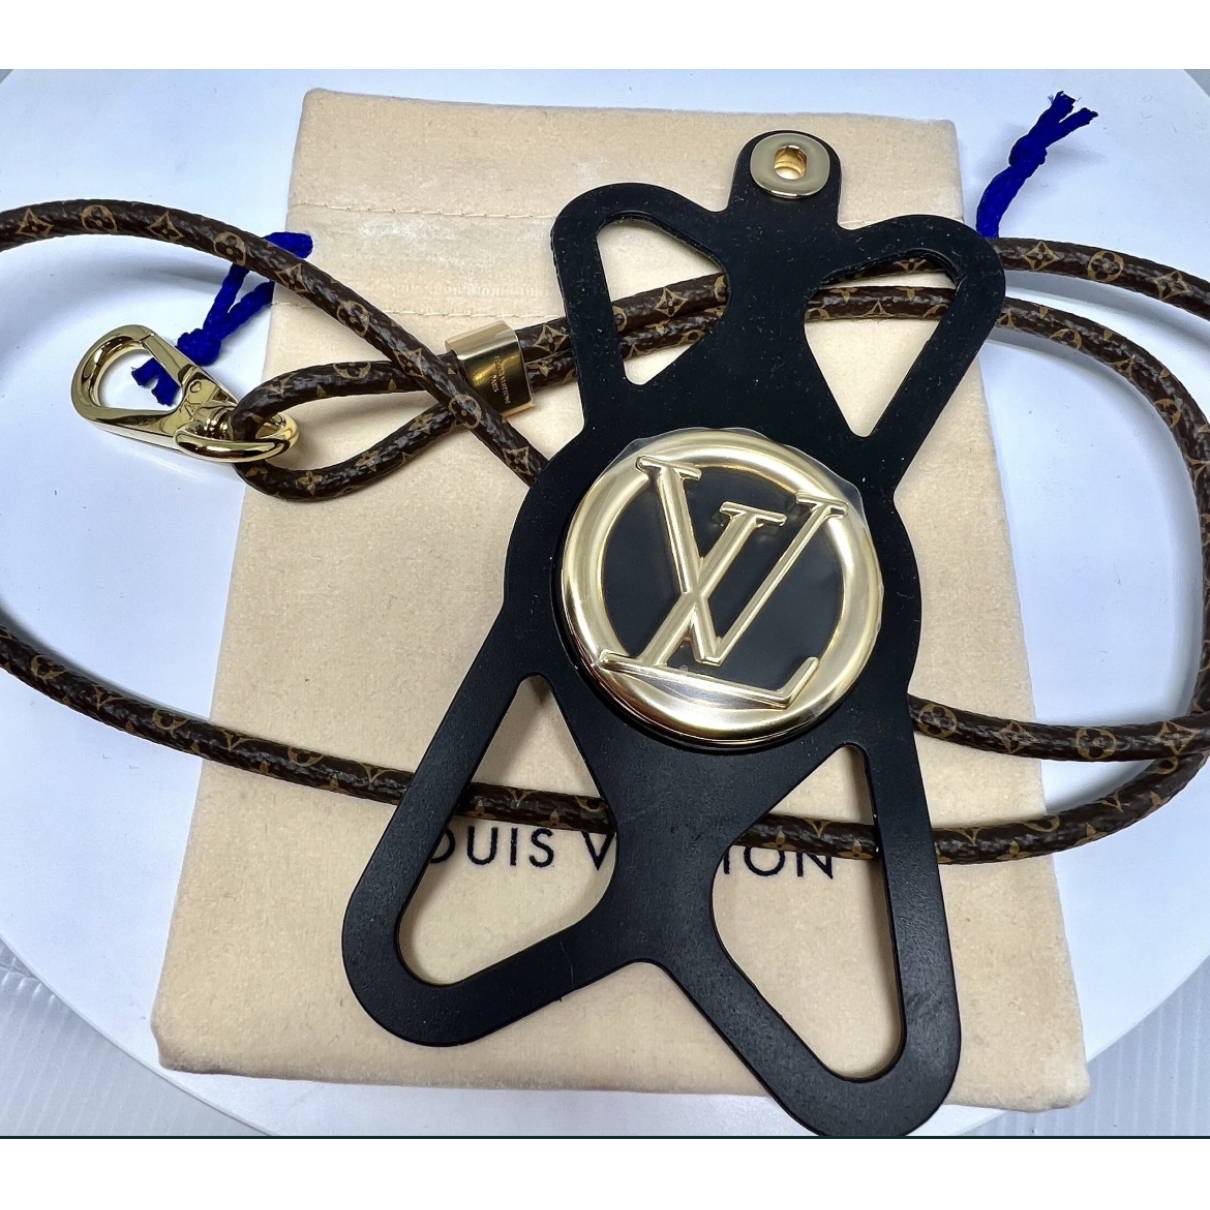 Louise leather phone charm Louis Vuitton Black in Leather - 34979652